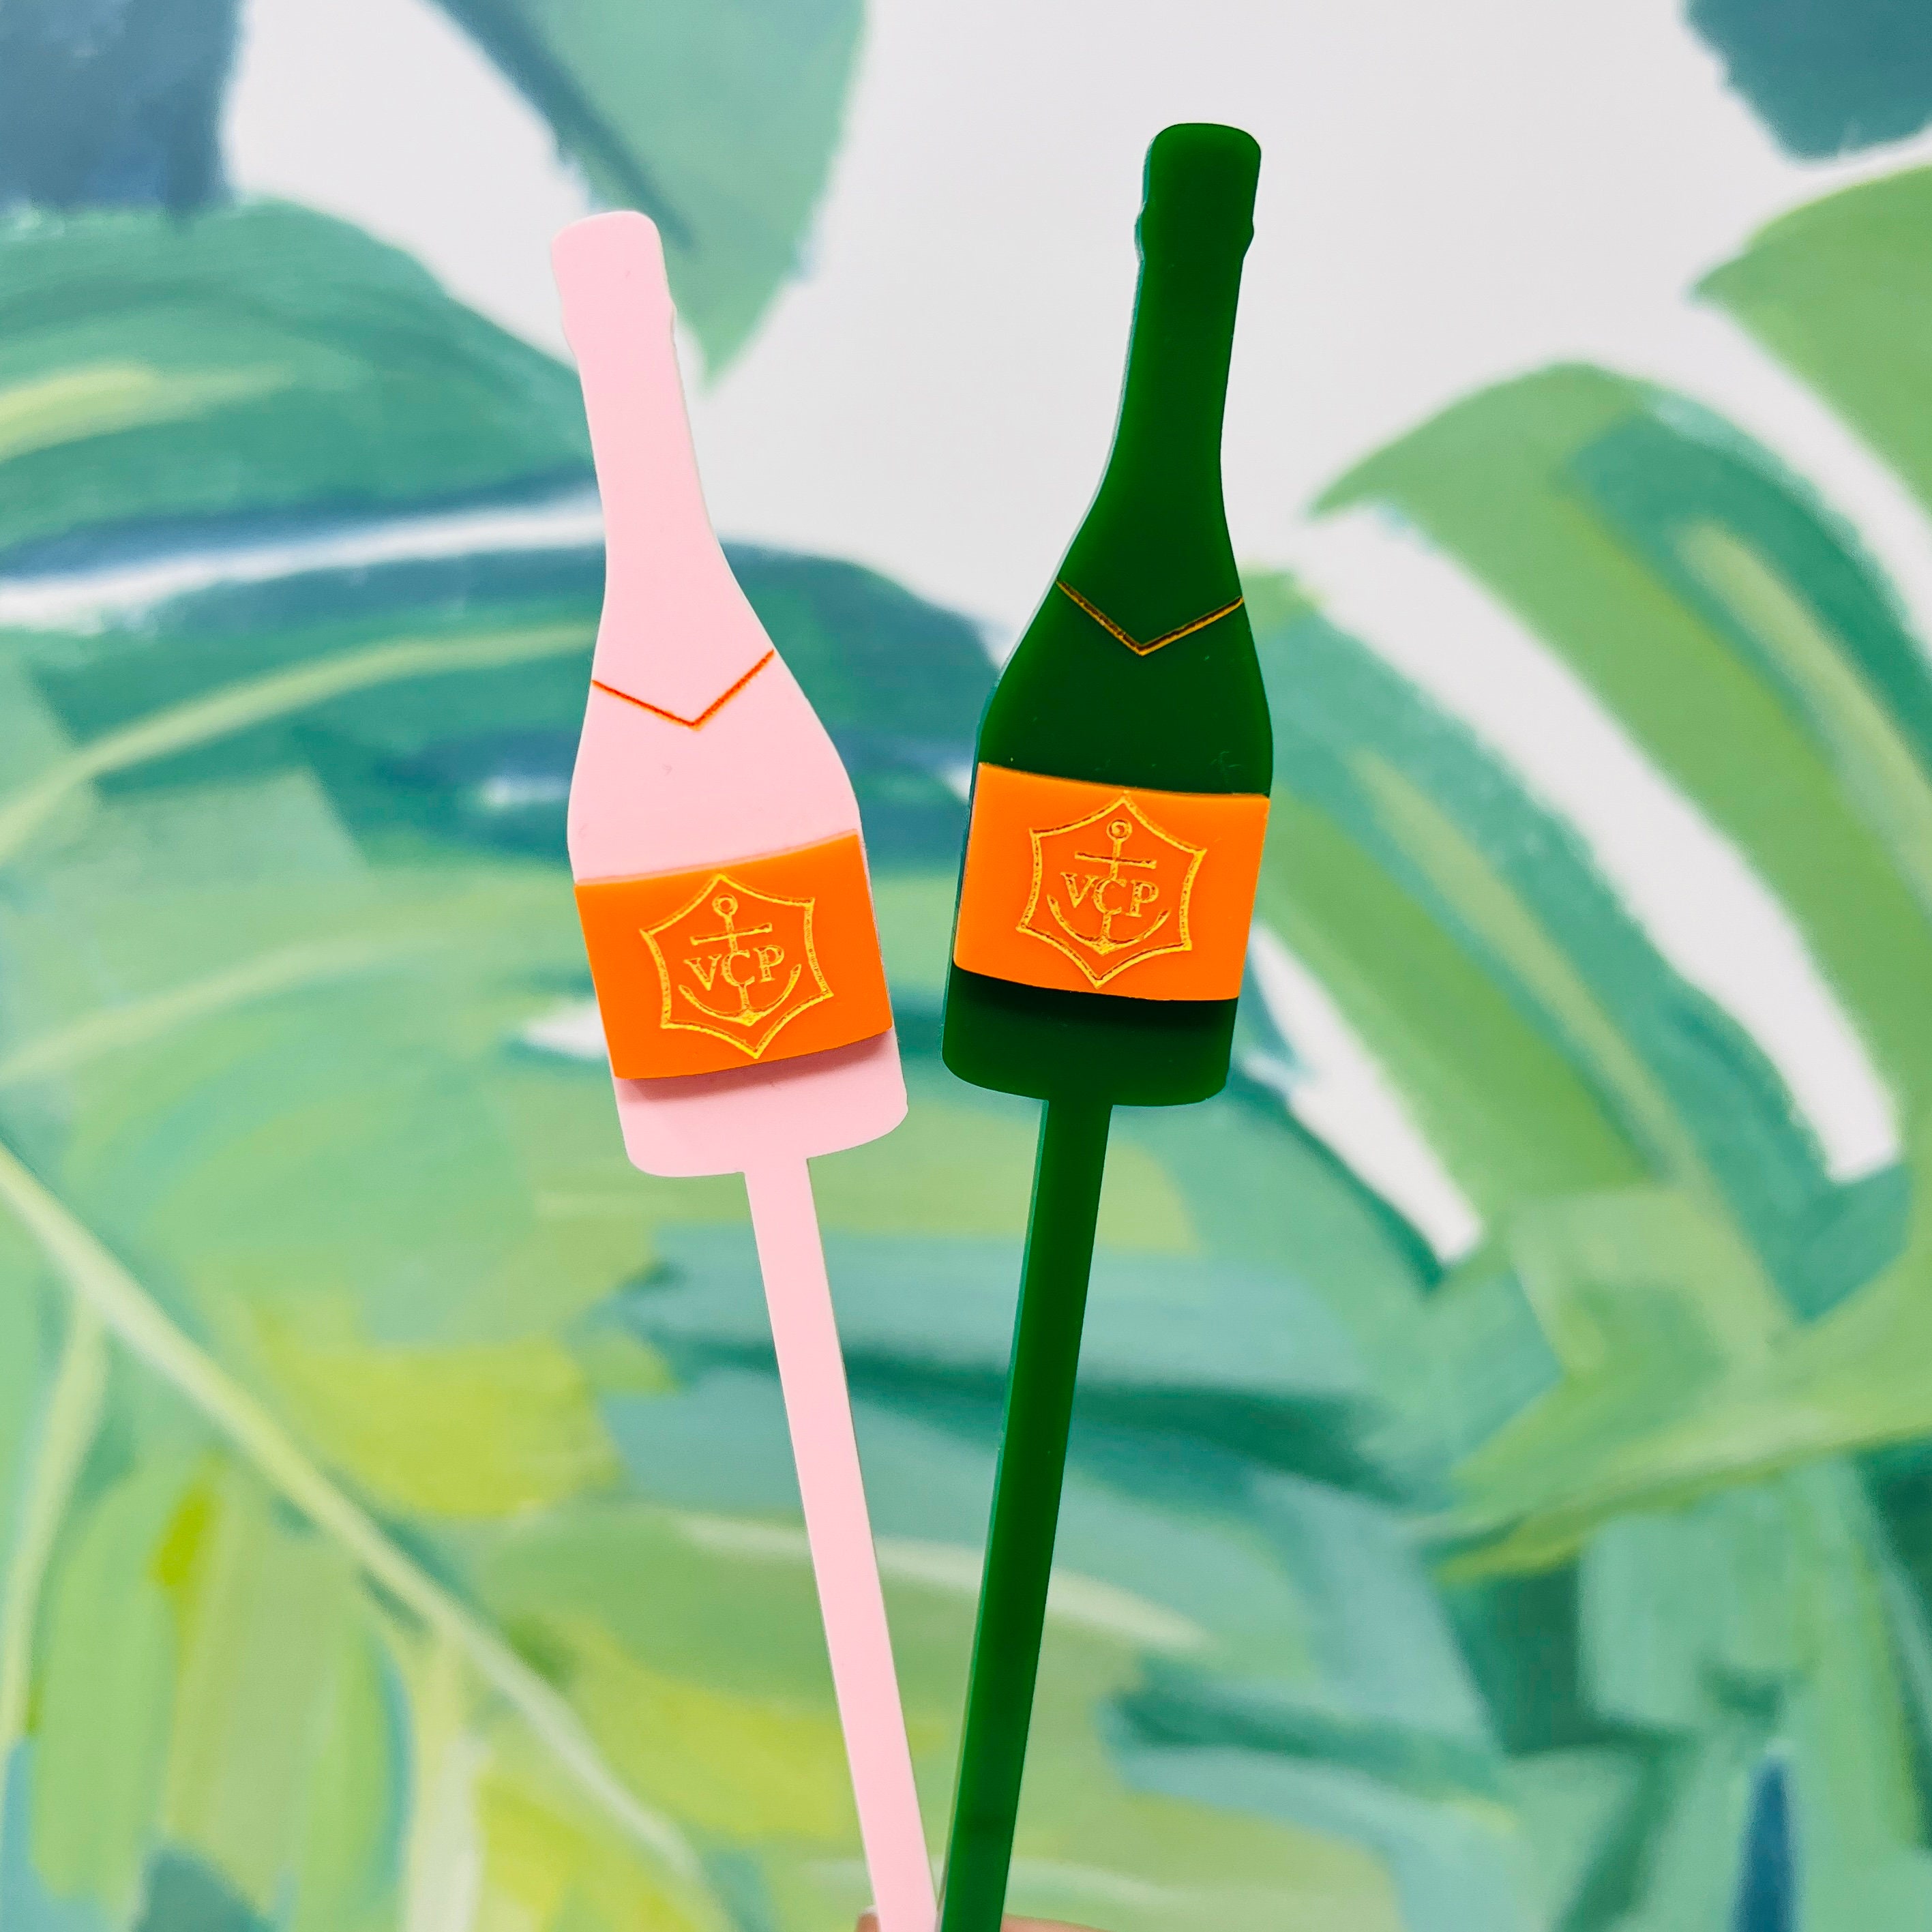 Pin by Champagnegummybears on Party Diy  Veuve clicquot, Veuve clicquot  champagne, Champagne brands